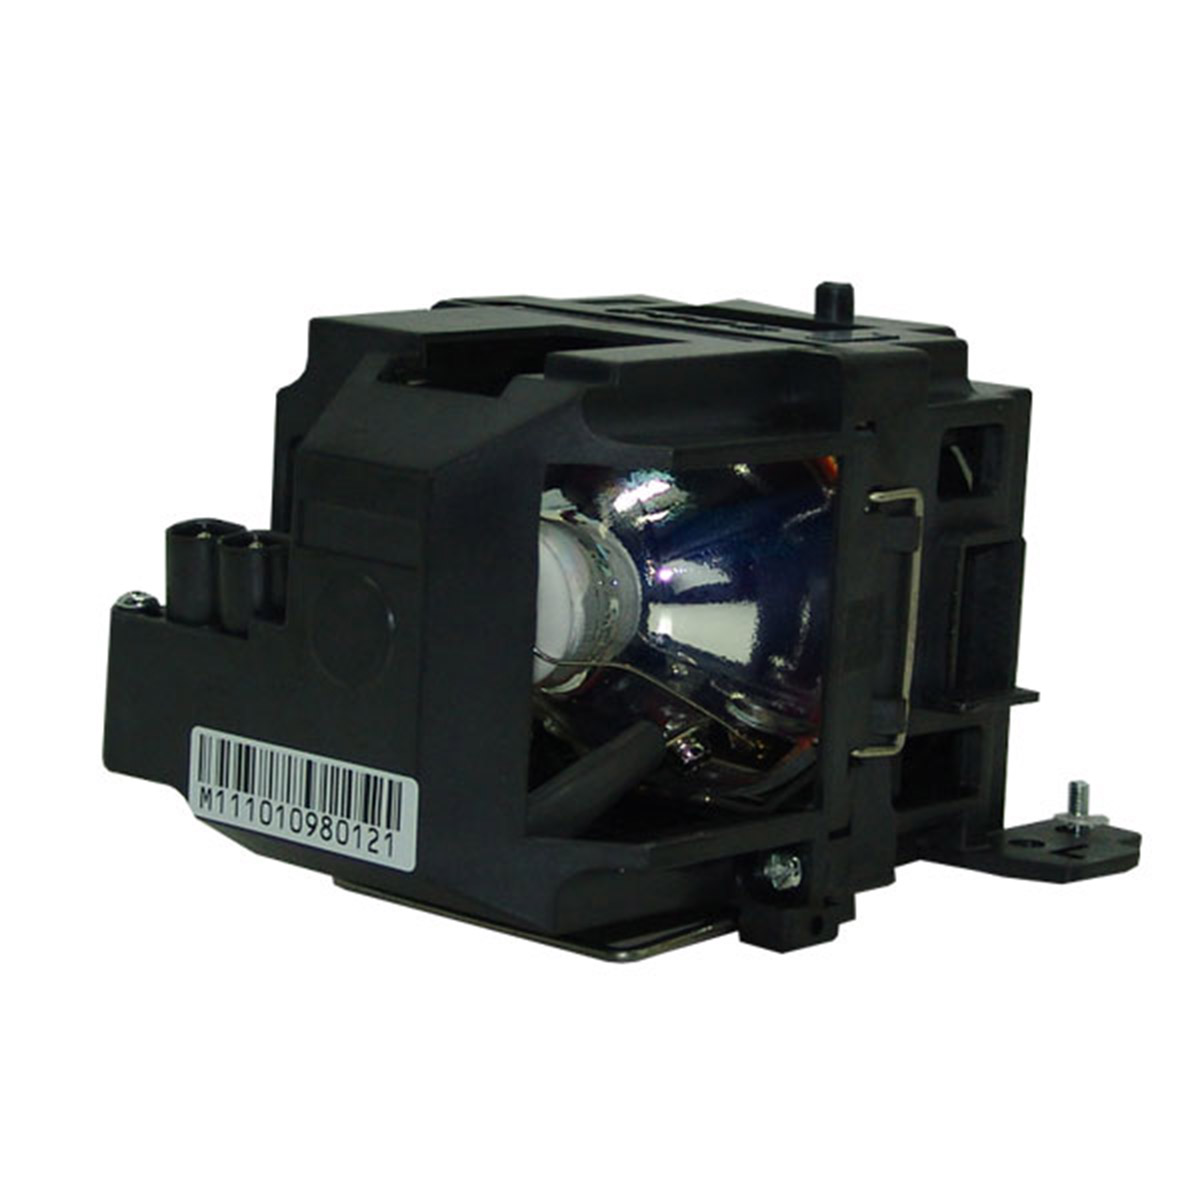 All-Lamps DT00731 Replacement Lamp with Housing For Hitachi CP-S240 CP-S245 CP-X250 Projectors